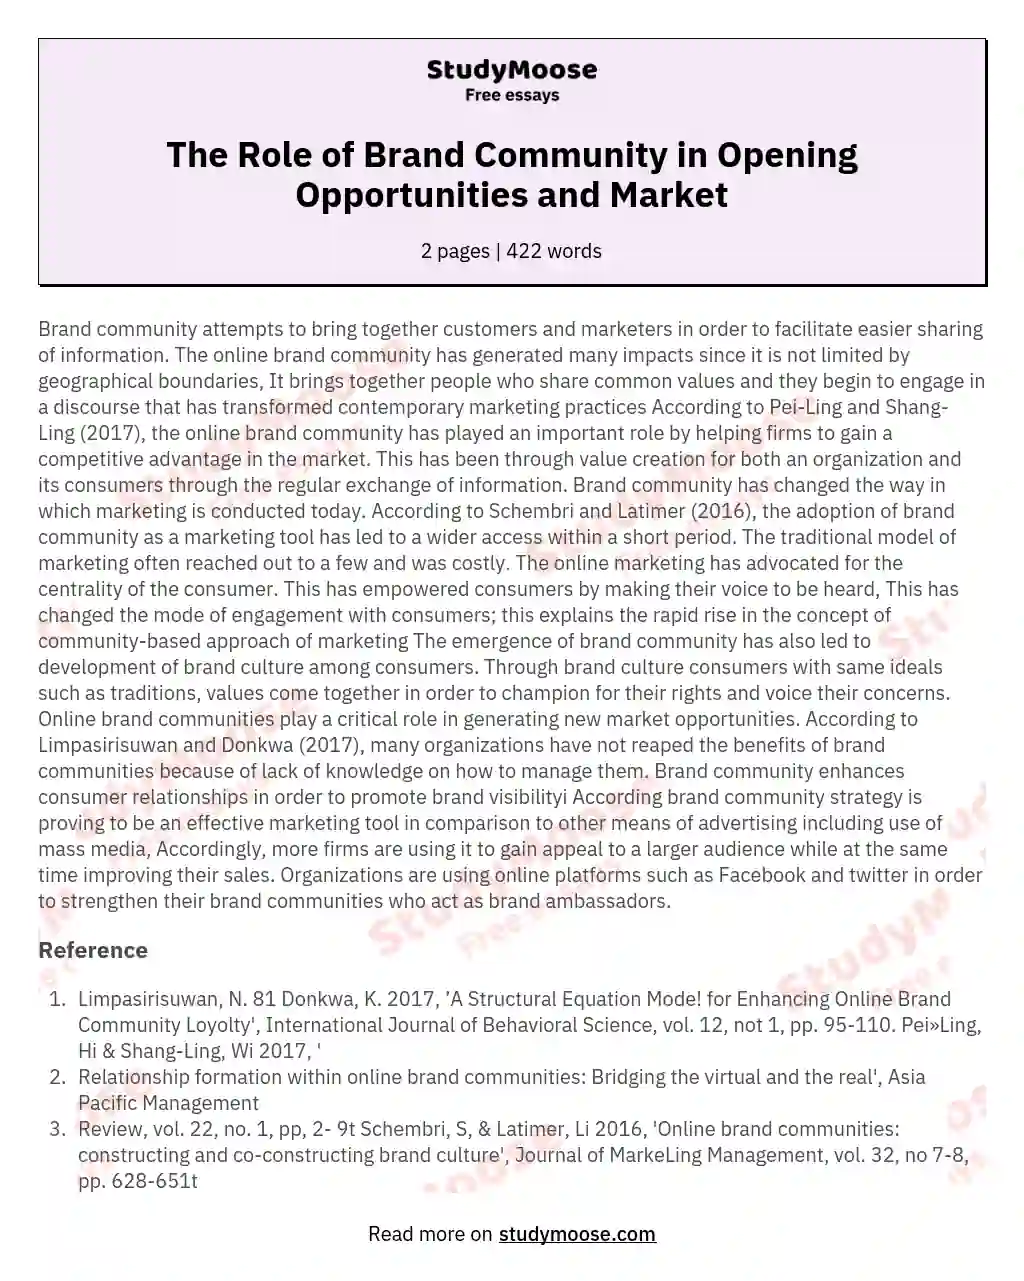 The Role of Brand Community in Opening Opportunities and Market essay